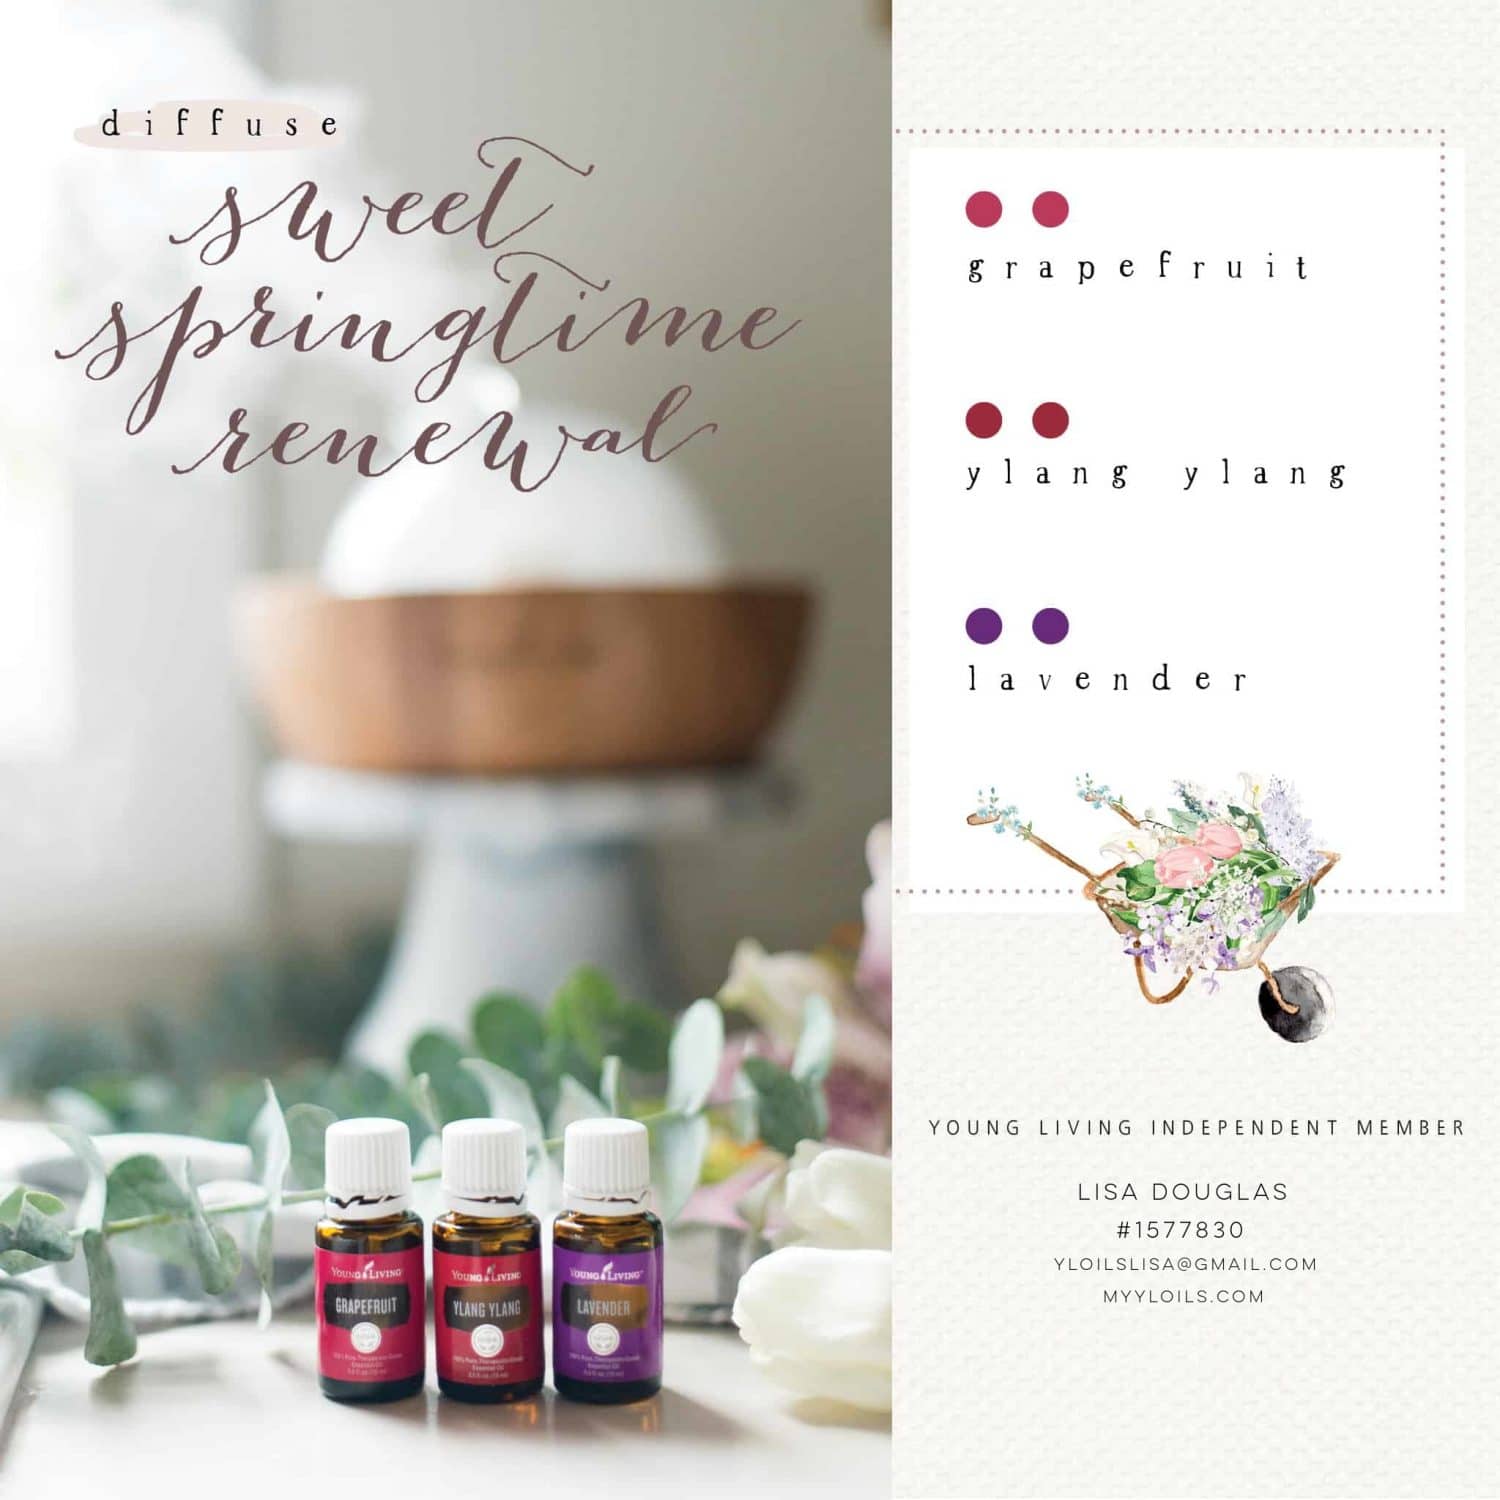 Sweet Springtime Renewal Young Living DIffuser Recipe